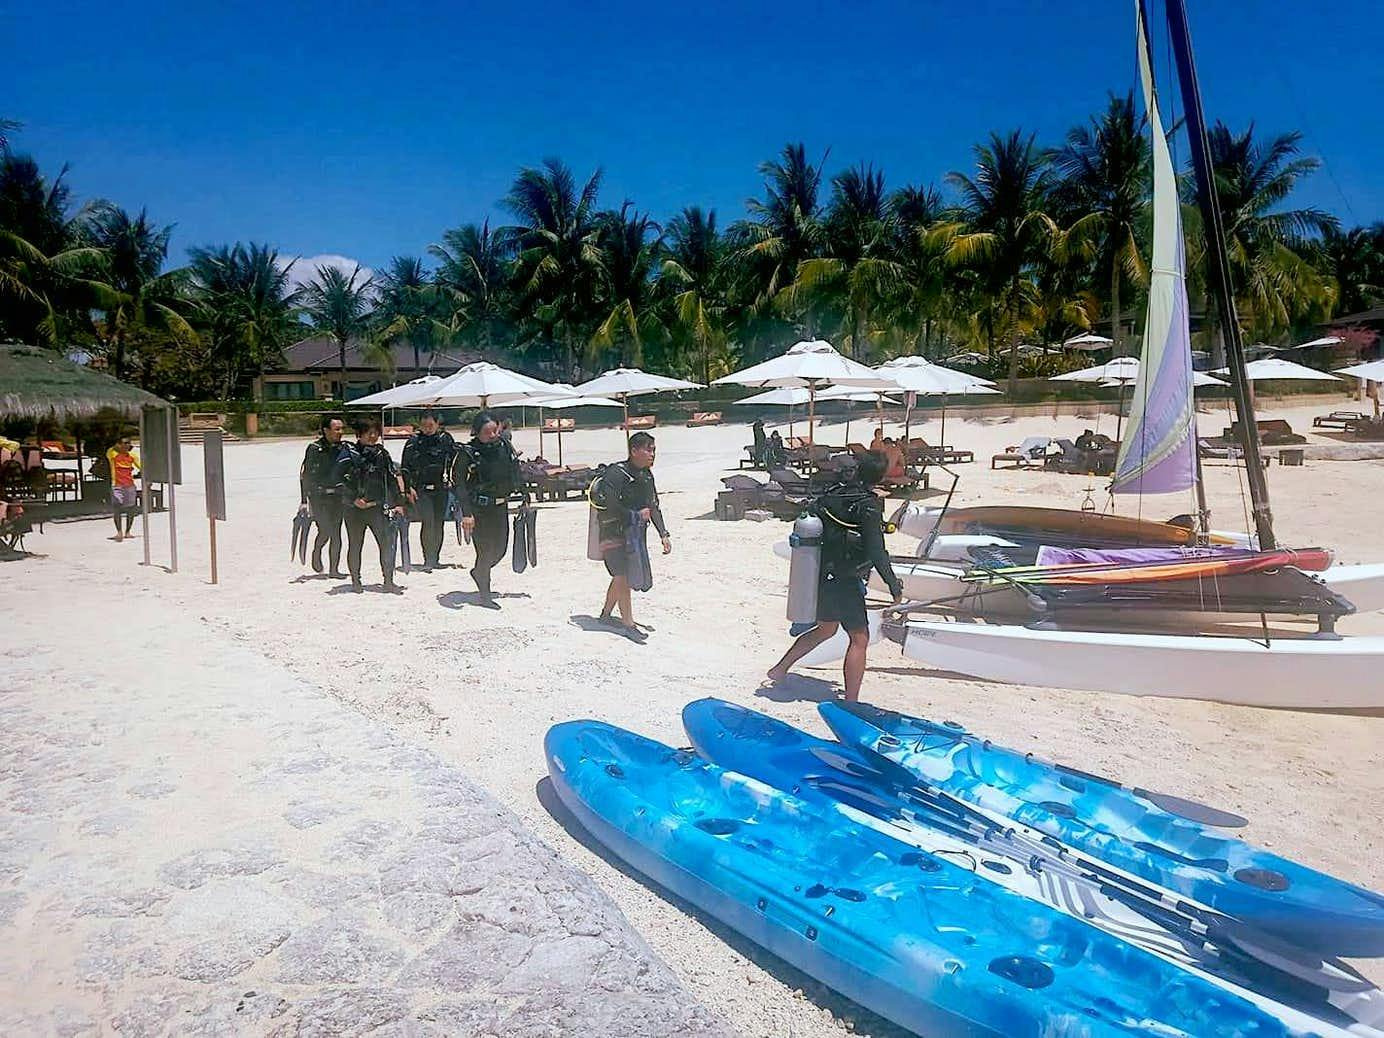 Divers about to board their boat for a diving session in Cebu